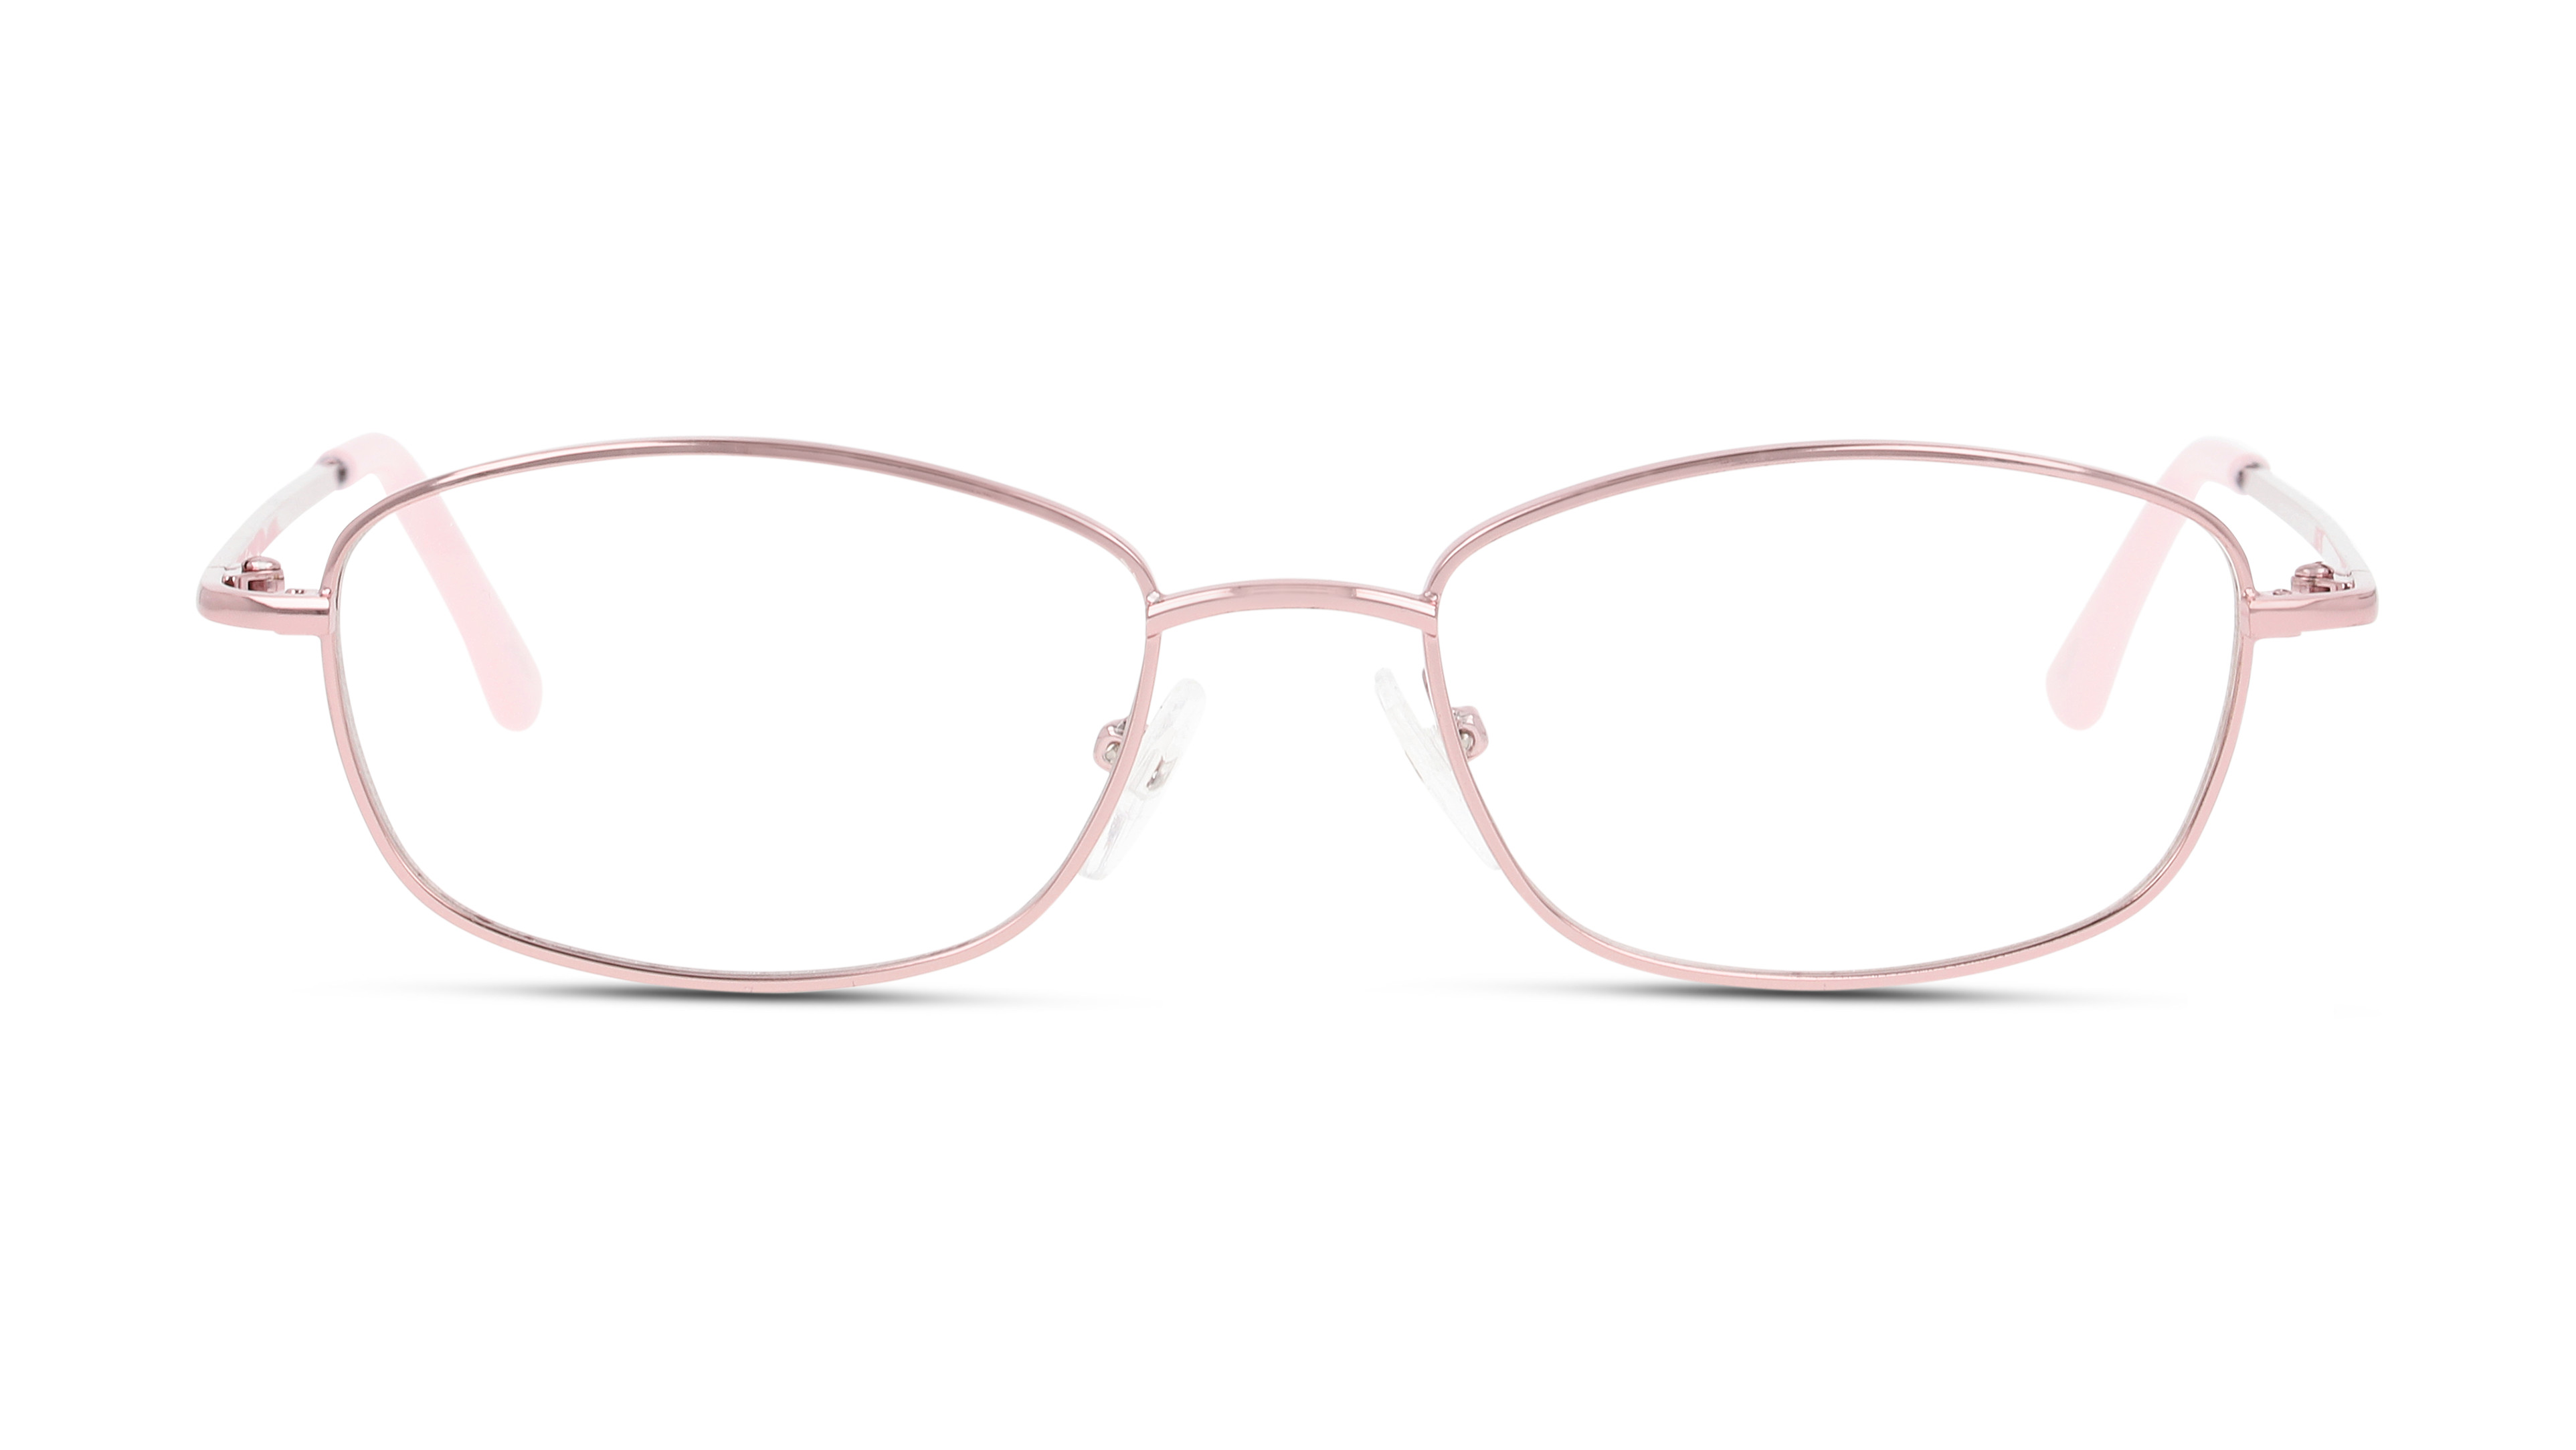 Front Seen SNDF03 PP00 Brille Rosa